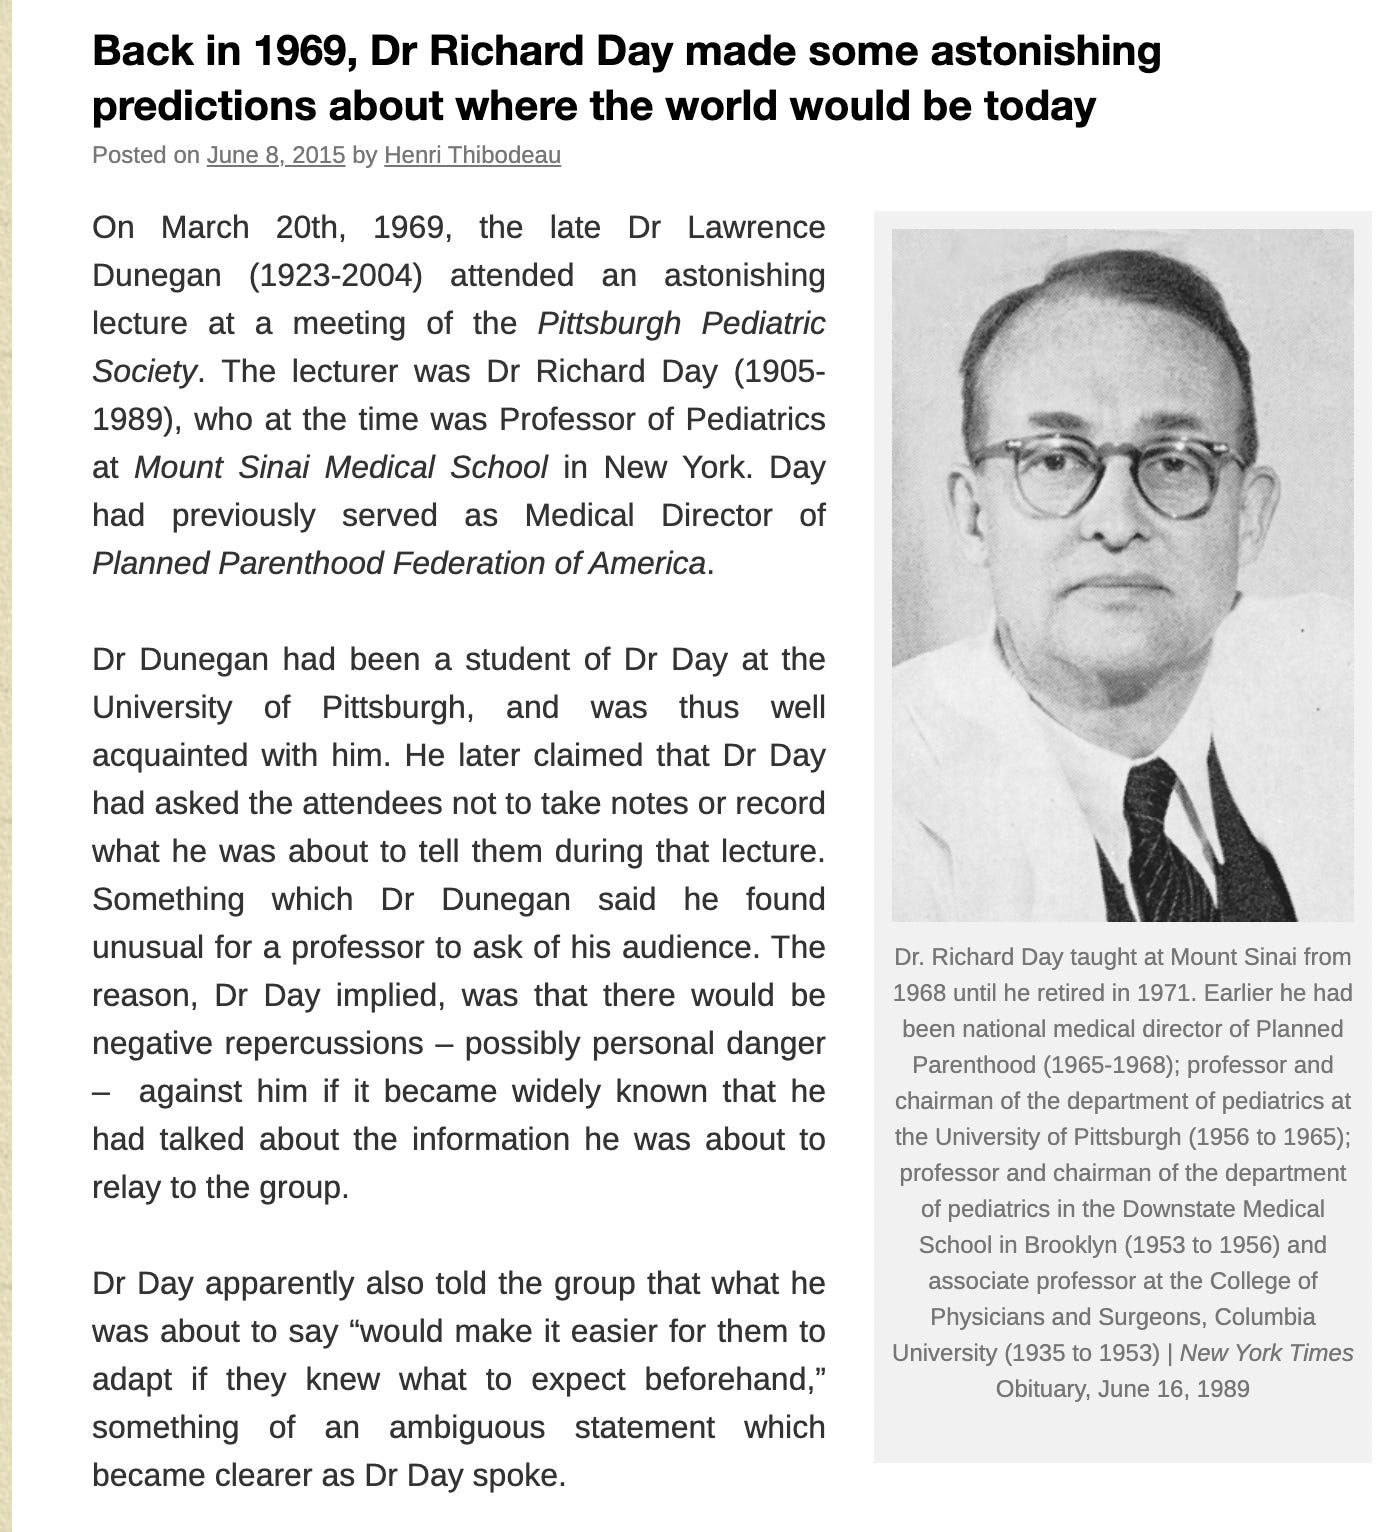 "Everything is in place and nobody can stop us now." In 1969, ex-Planned Parenthood Medical Director Richard Day Prophesied How the Depopulation Global Agenda Would Unfold 